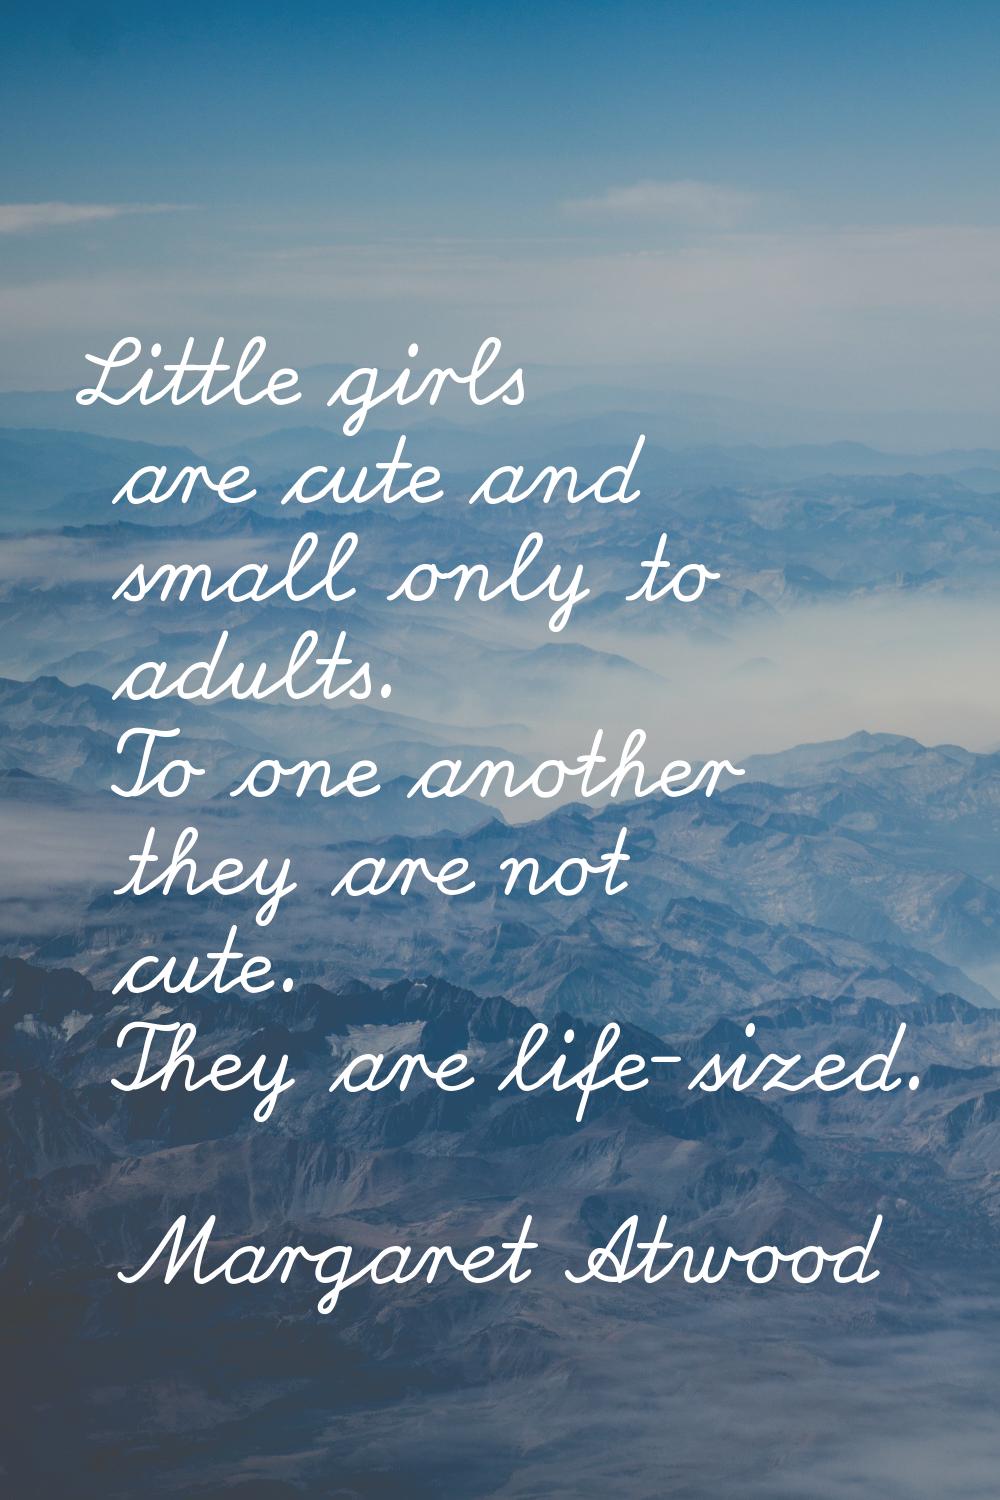 Little girls are cute and small only to adults. To one another they are not cute. They are life-siz